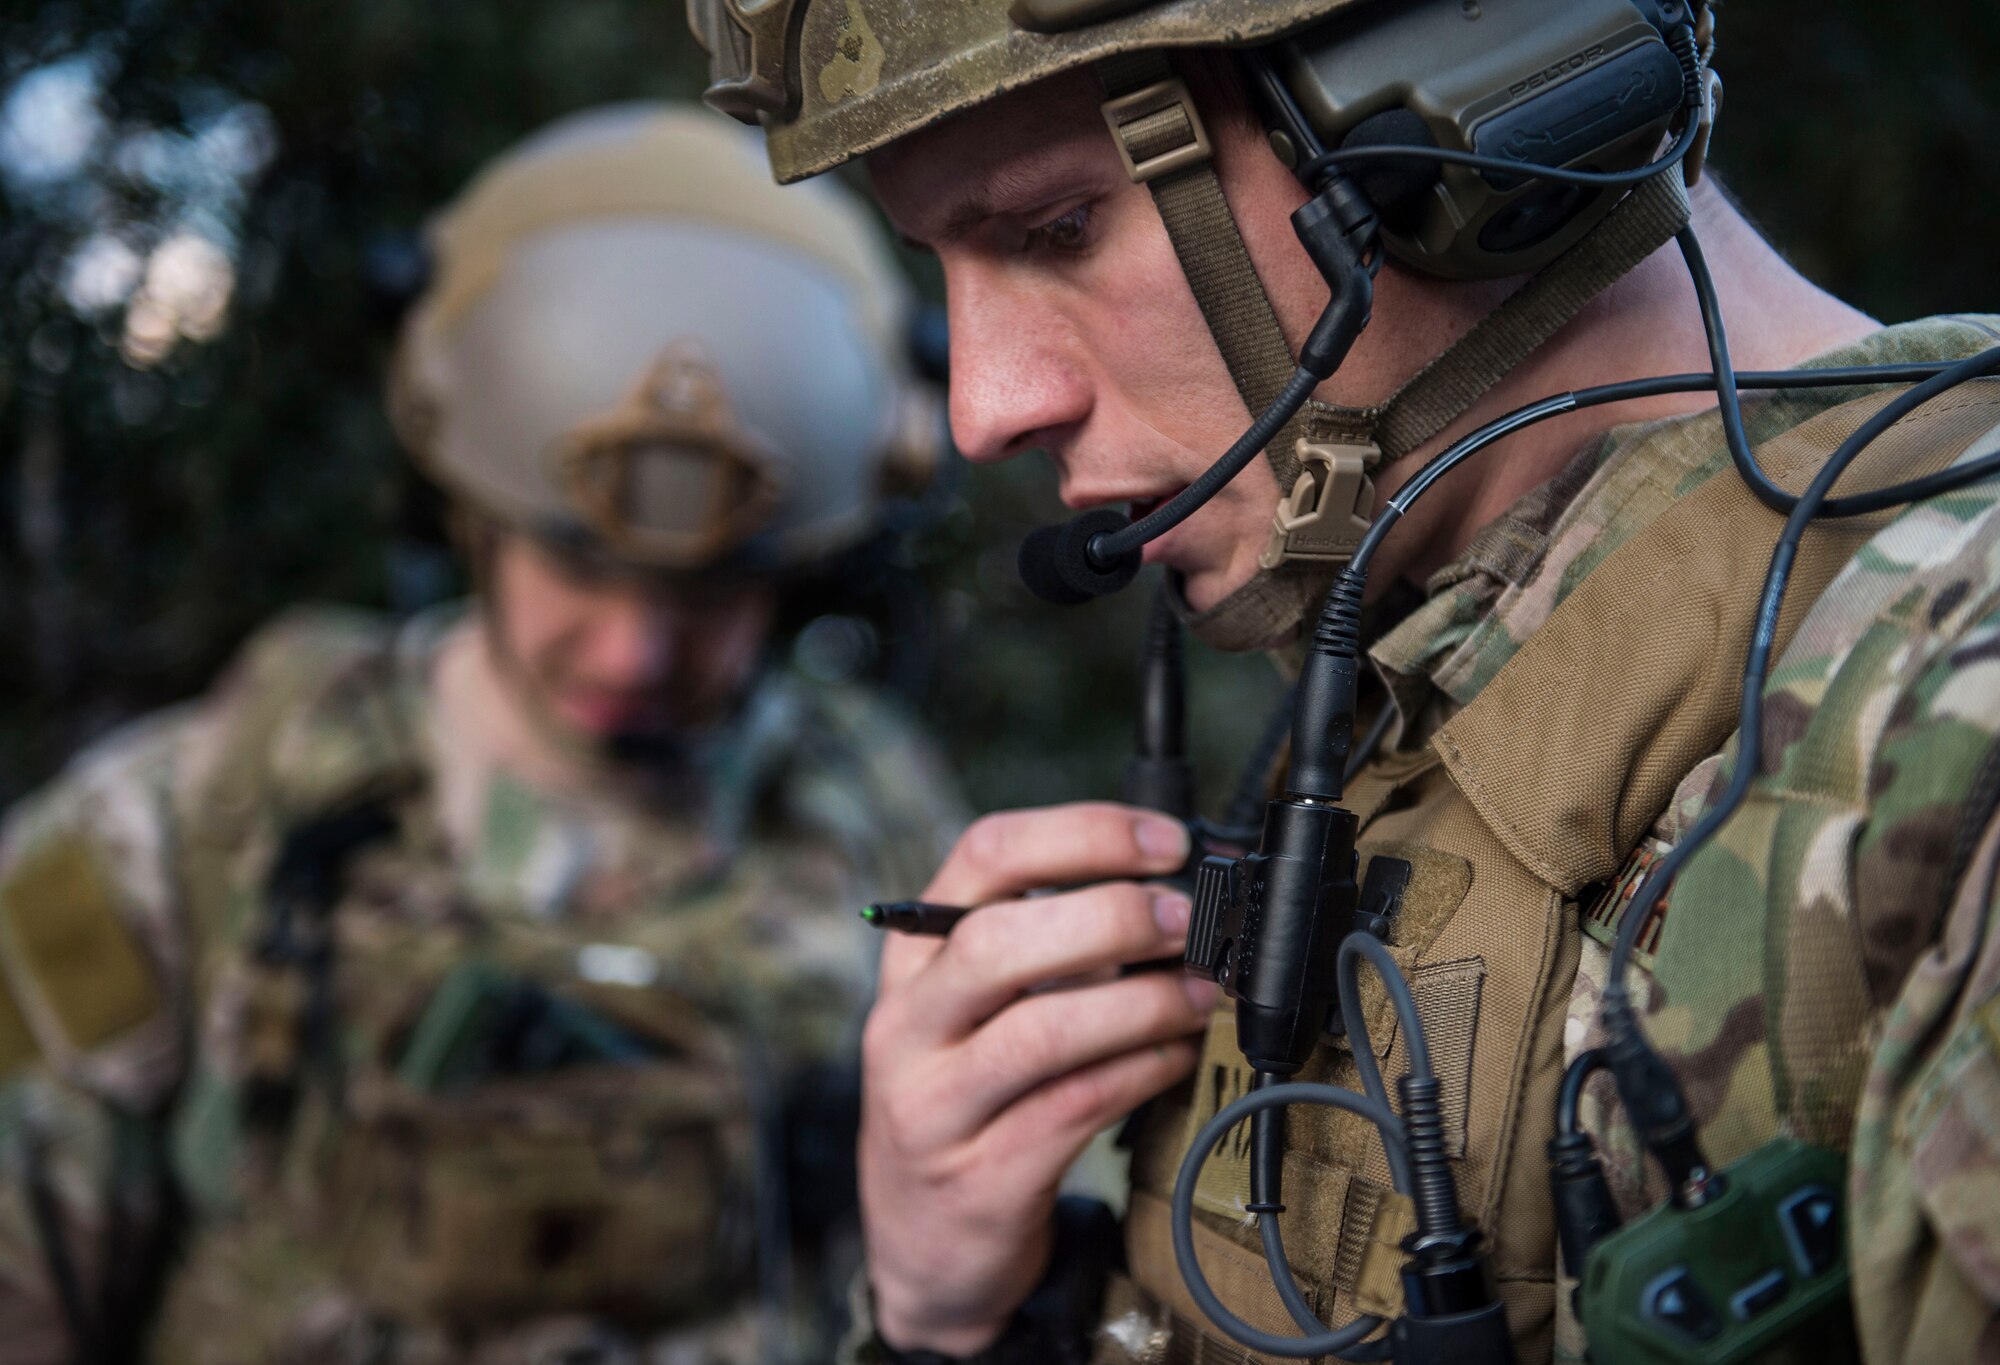 Senior Airman Tormod Lillekroken, 2nd Air Support Operations Squadron joint terminal attack controller, reviews training objectives as part of a night training scenario during Exercise Serpentex ‘16 in Corsica, France, March 15, 2016. Lillekroken is a member of an elite group of Airmen known as tactical air control party members and has been recently assigned to the 2nd ASOS. Lillekroken was raised in Stange, Norway and uses his ability to speak four languages to build partnership capacity while stationed in Europe. (U.S. Air Force photo/Staff Sgt. Sara Keller)